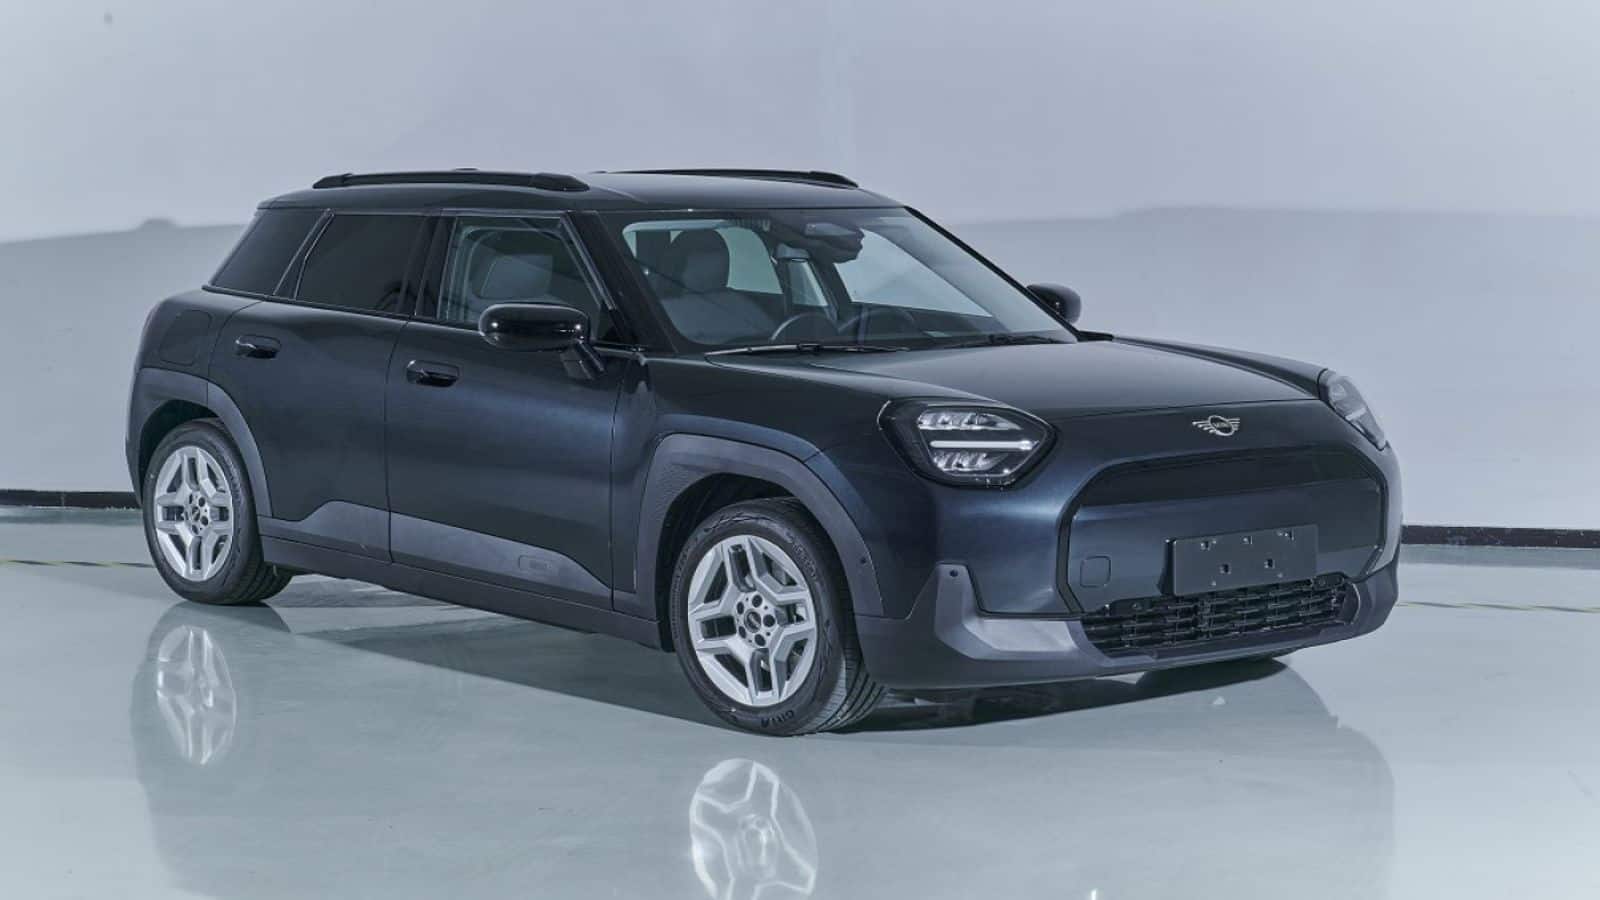 MINI Aceman EV revealed in leaked renders: Check design, features